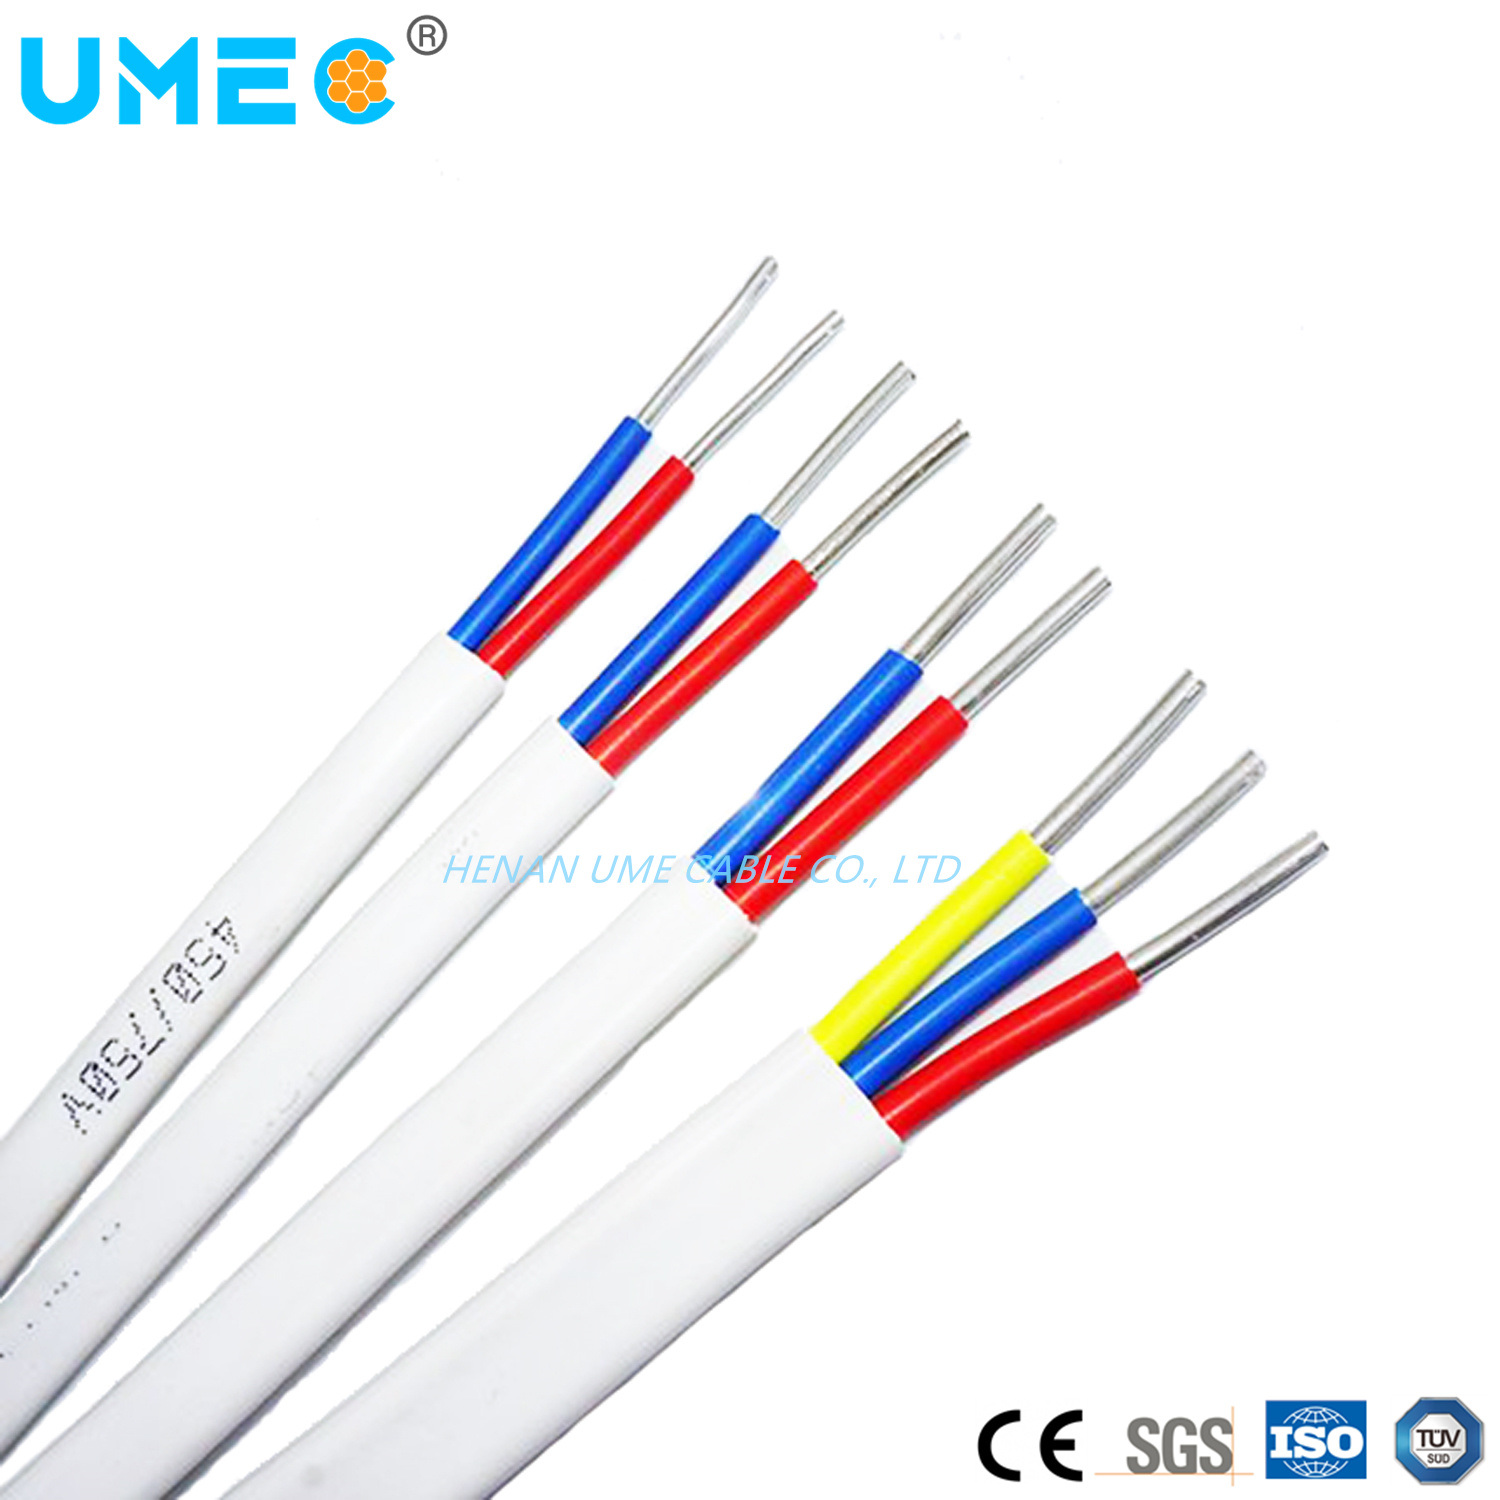 Wholesale Flat BVVB Blvvb Solid or Stranded Copper Conductor PVC Insulated Sheath Multi-Core Cables